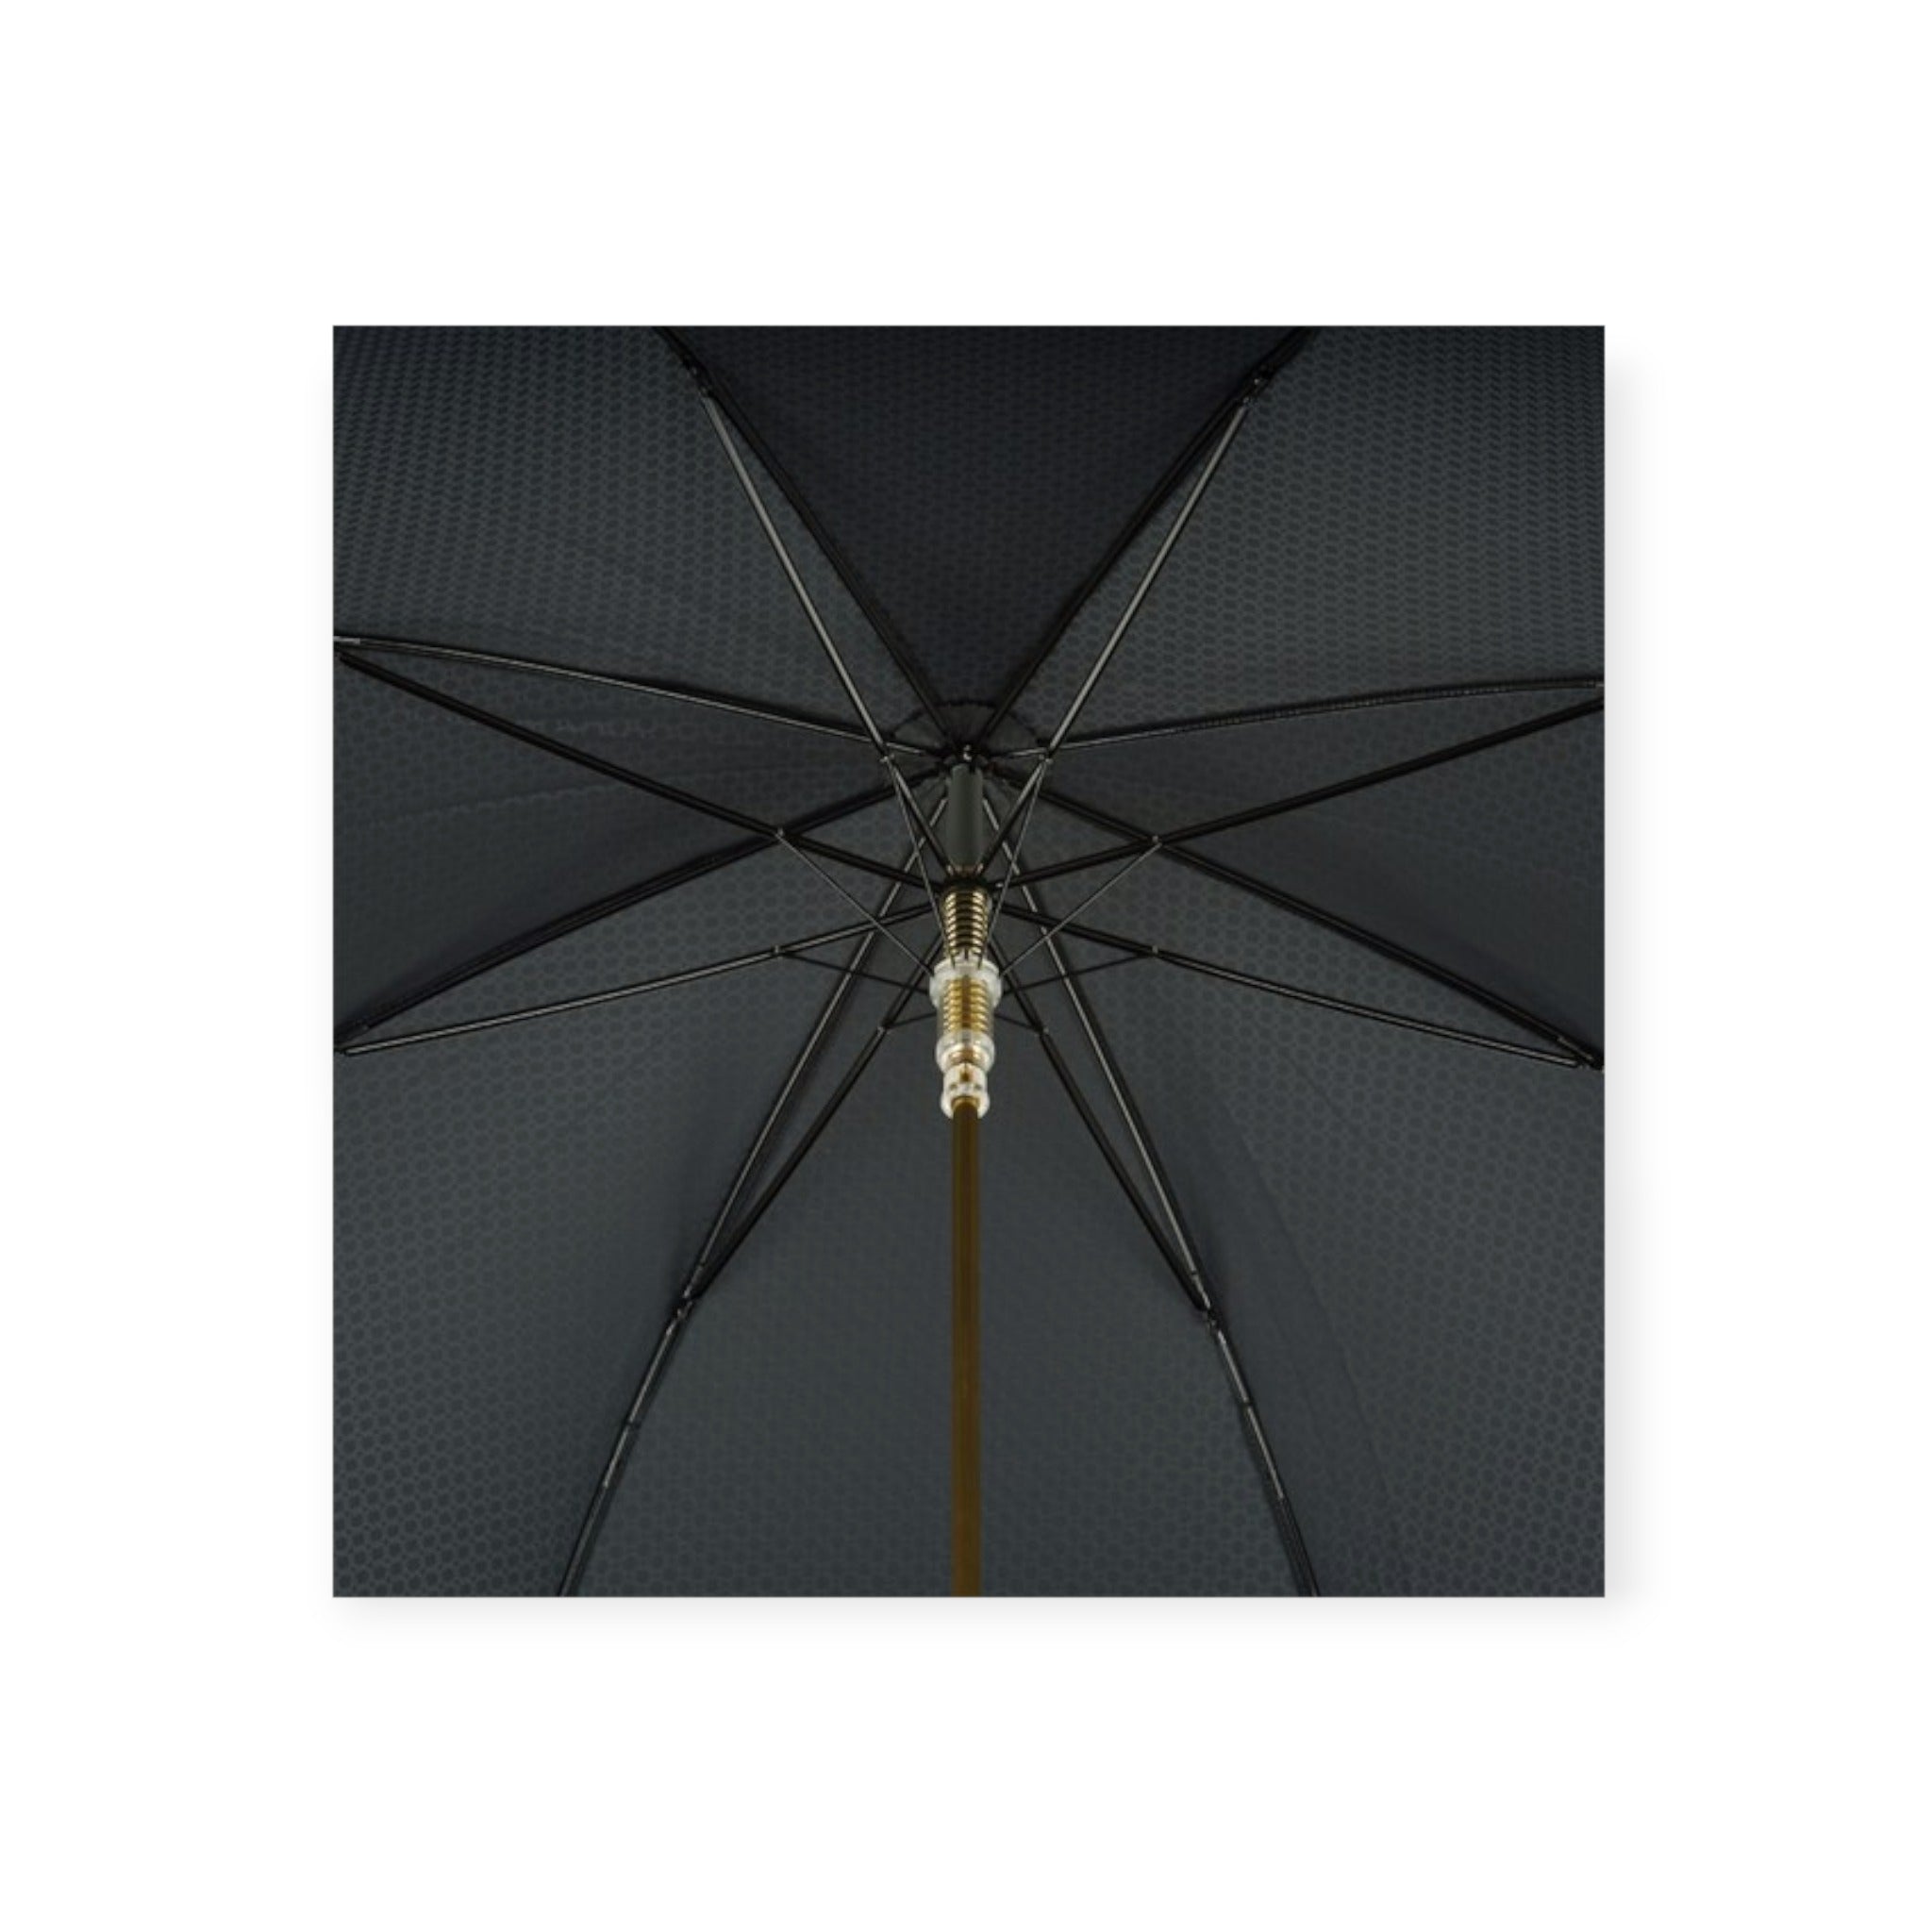 Inside view of opened Pasotti Lion umbrella 